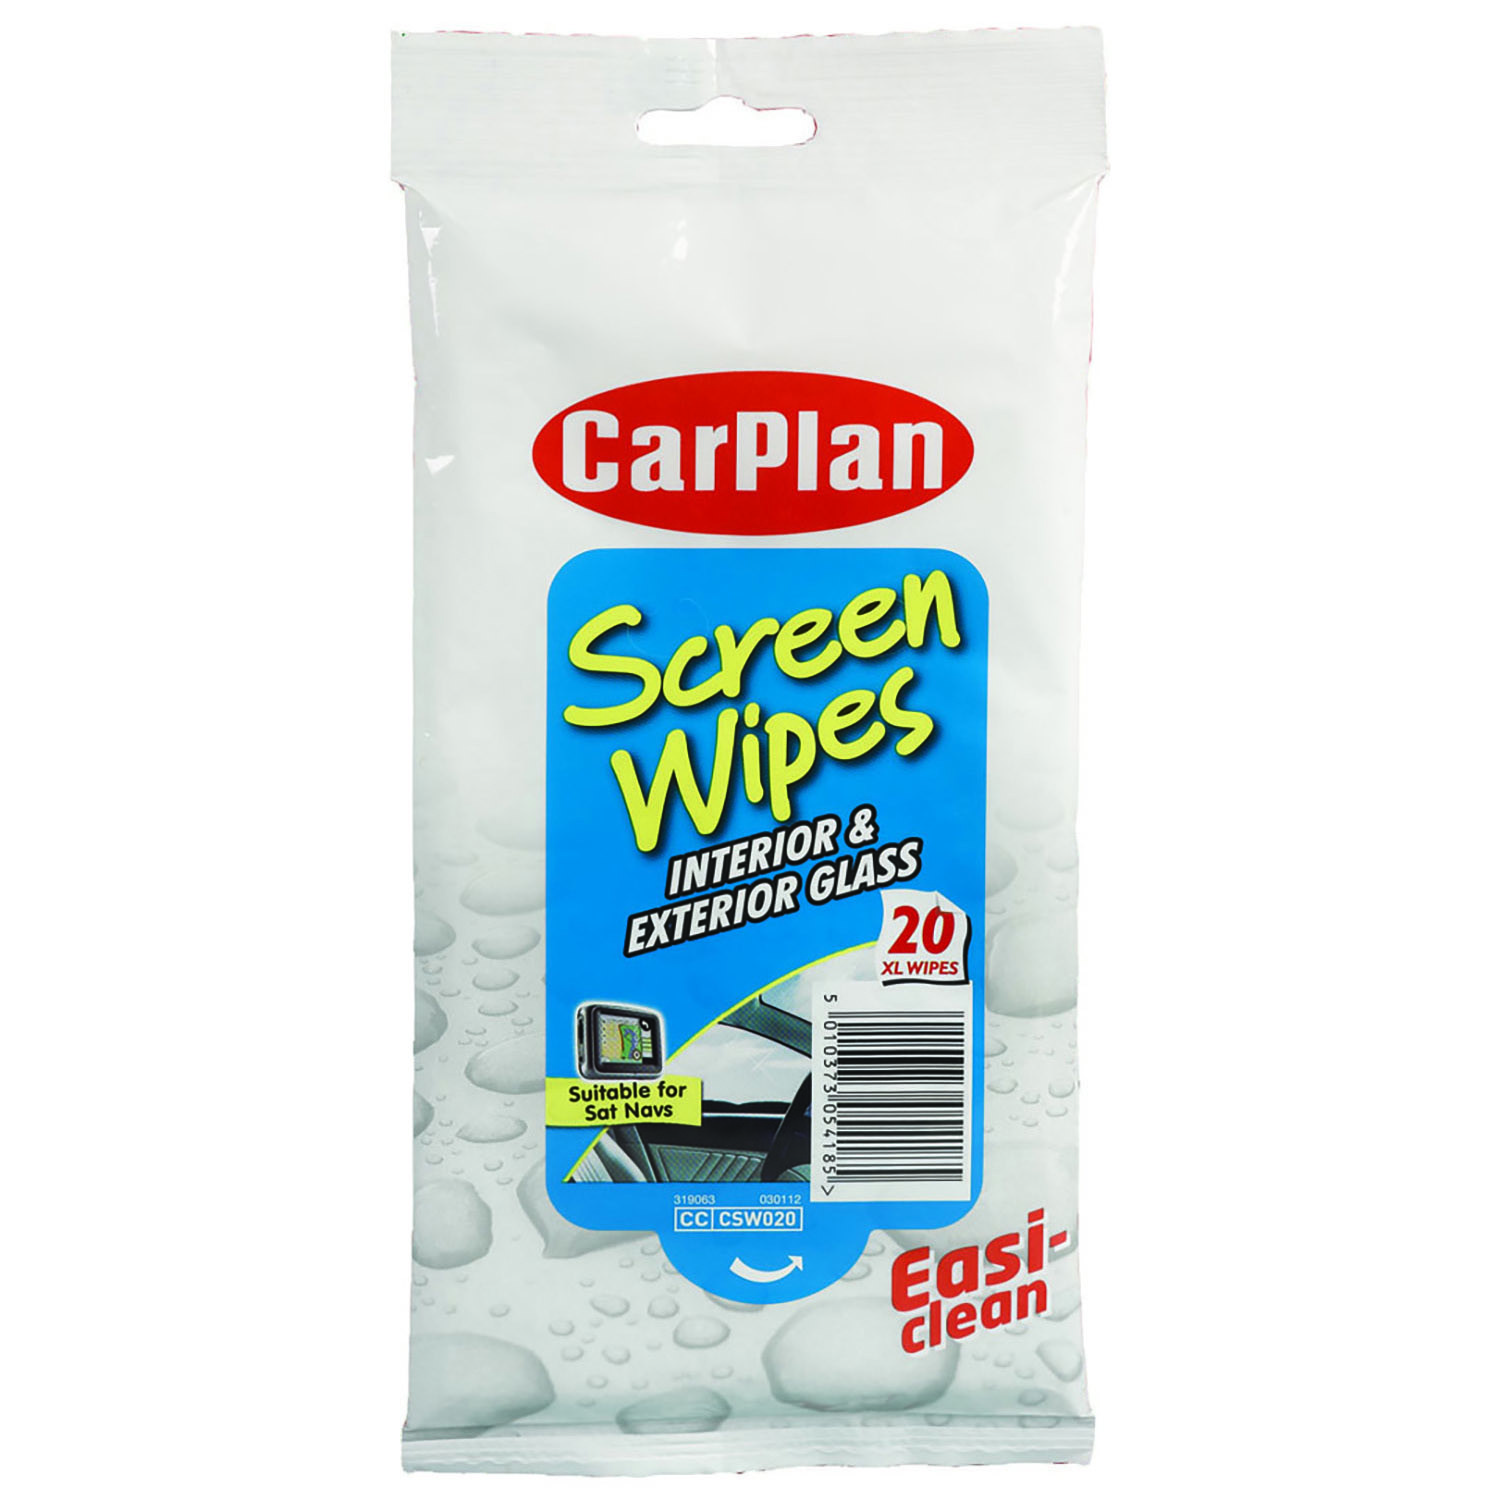 CarPlan Interior and Exterior Glass Screen XL Wipes 20 Pack Image